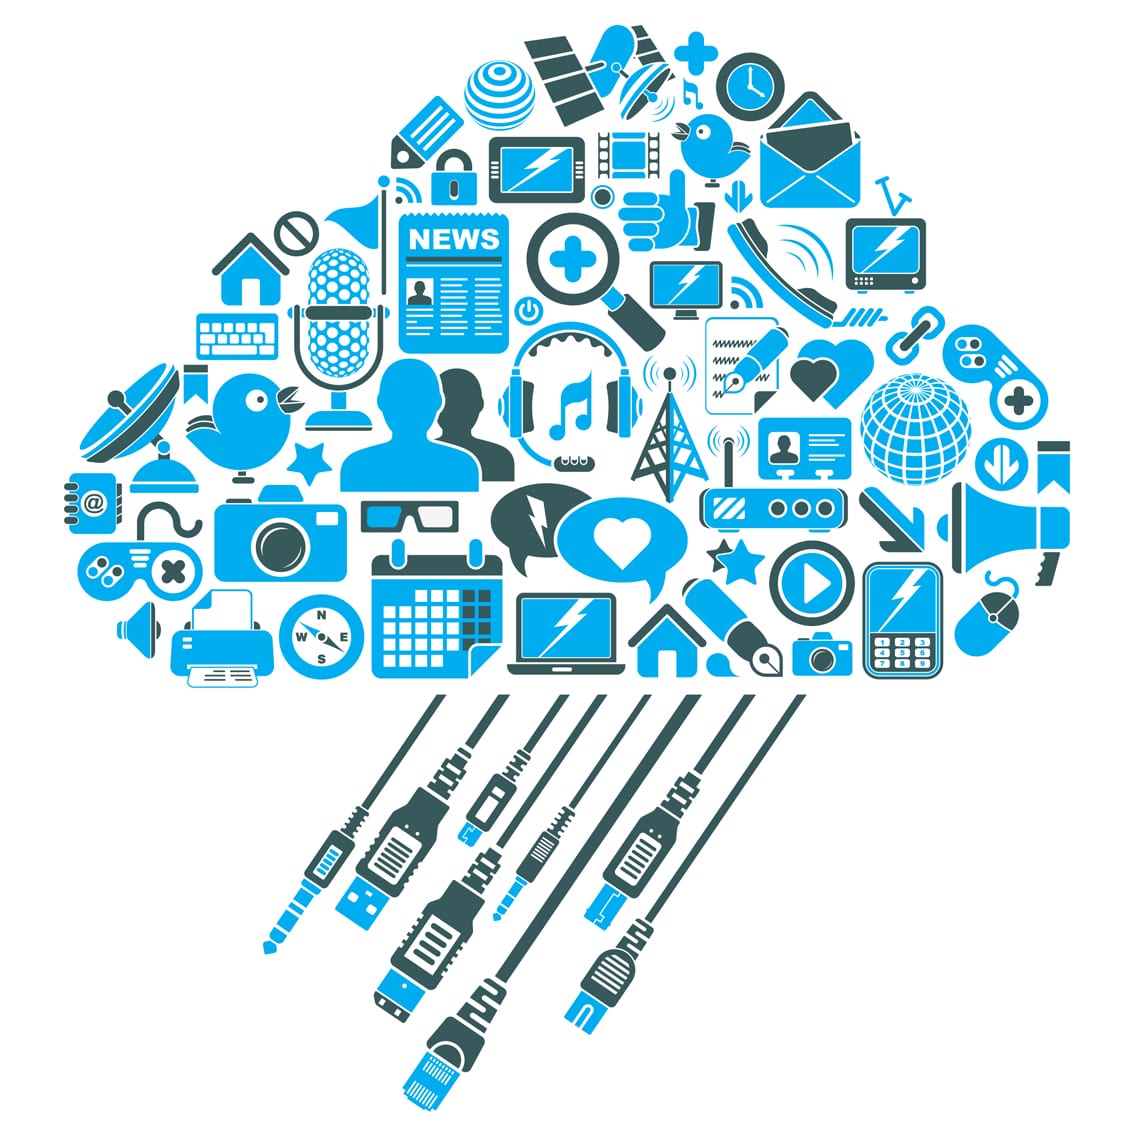 cloud graphic made up of icons for cloud computing